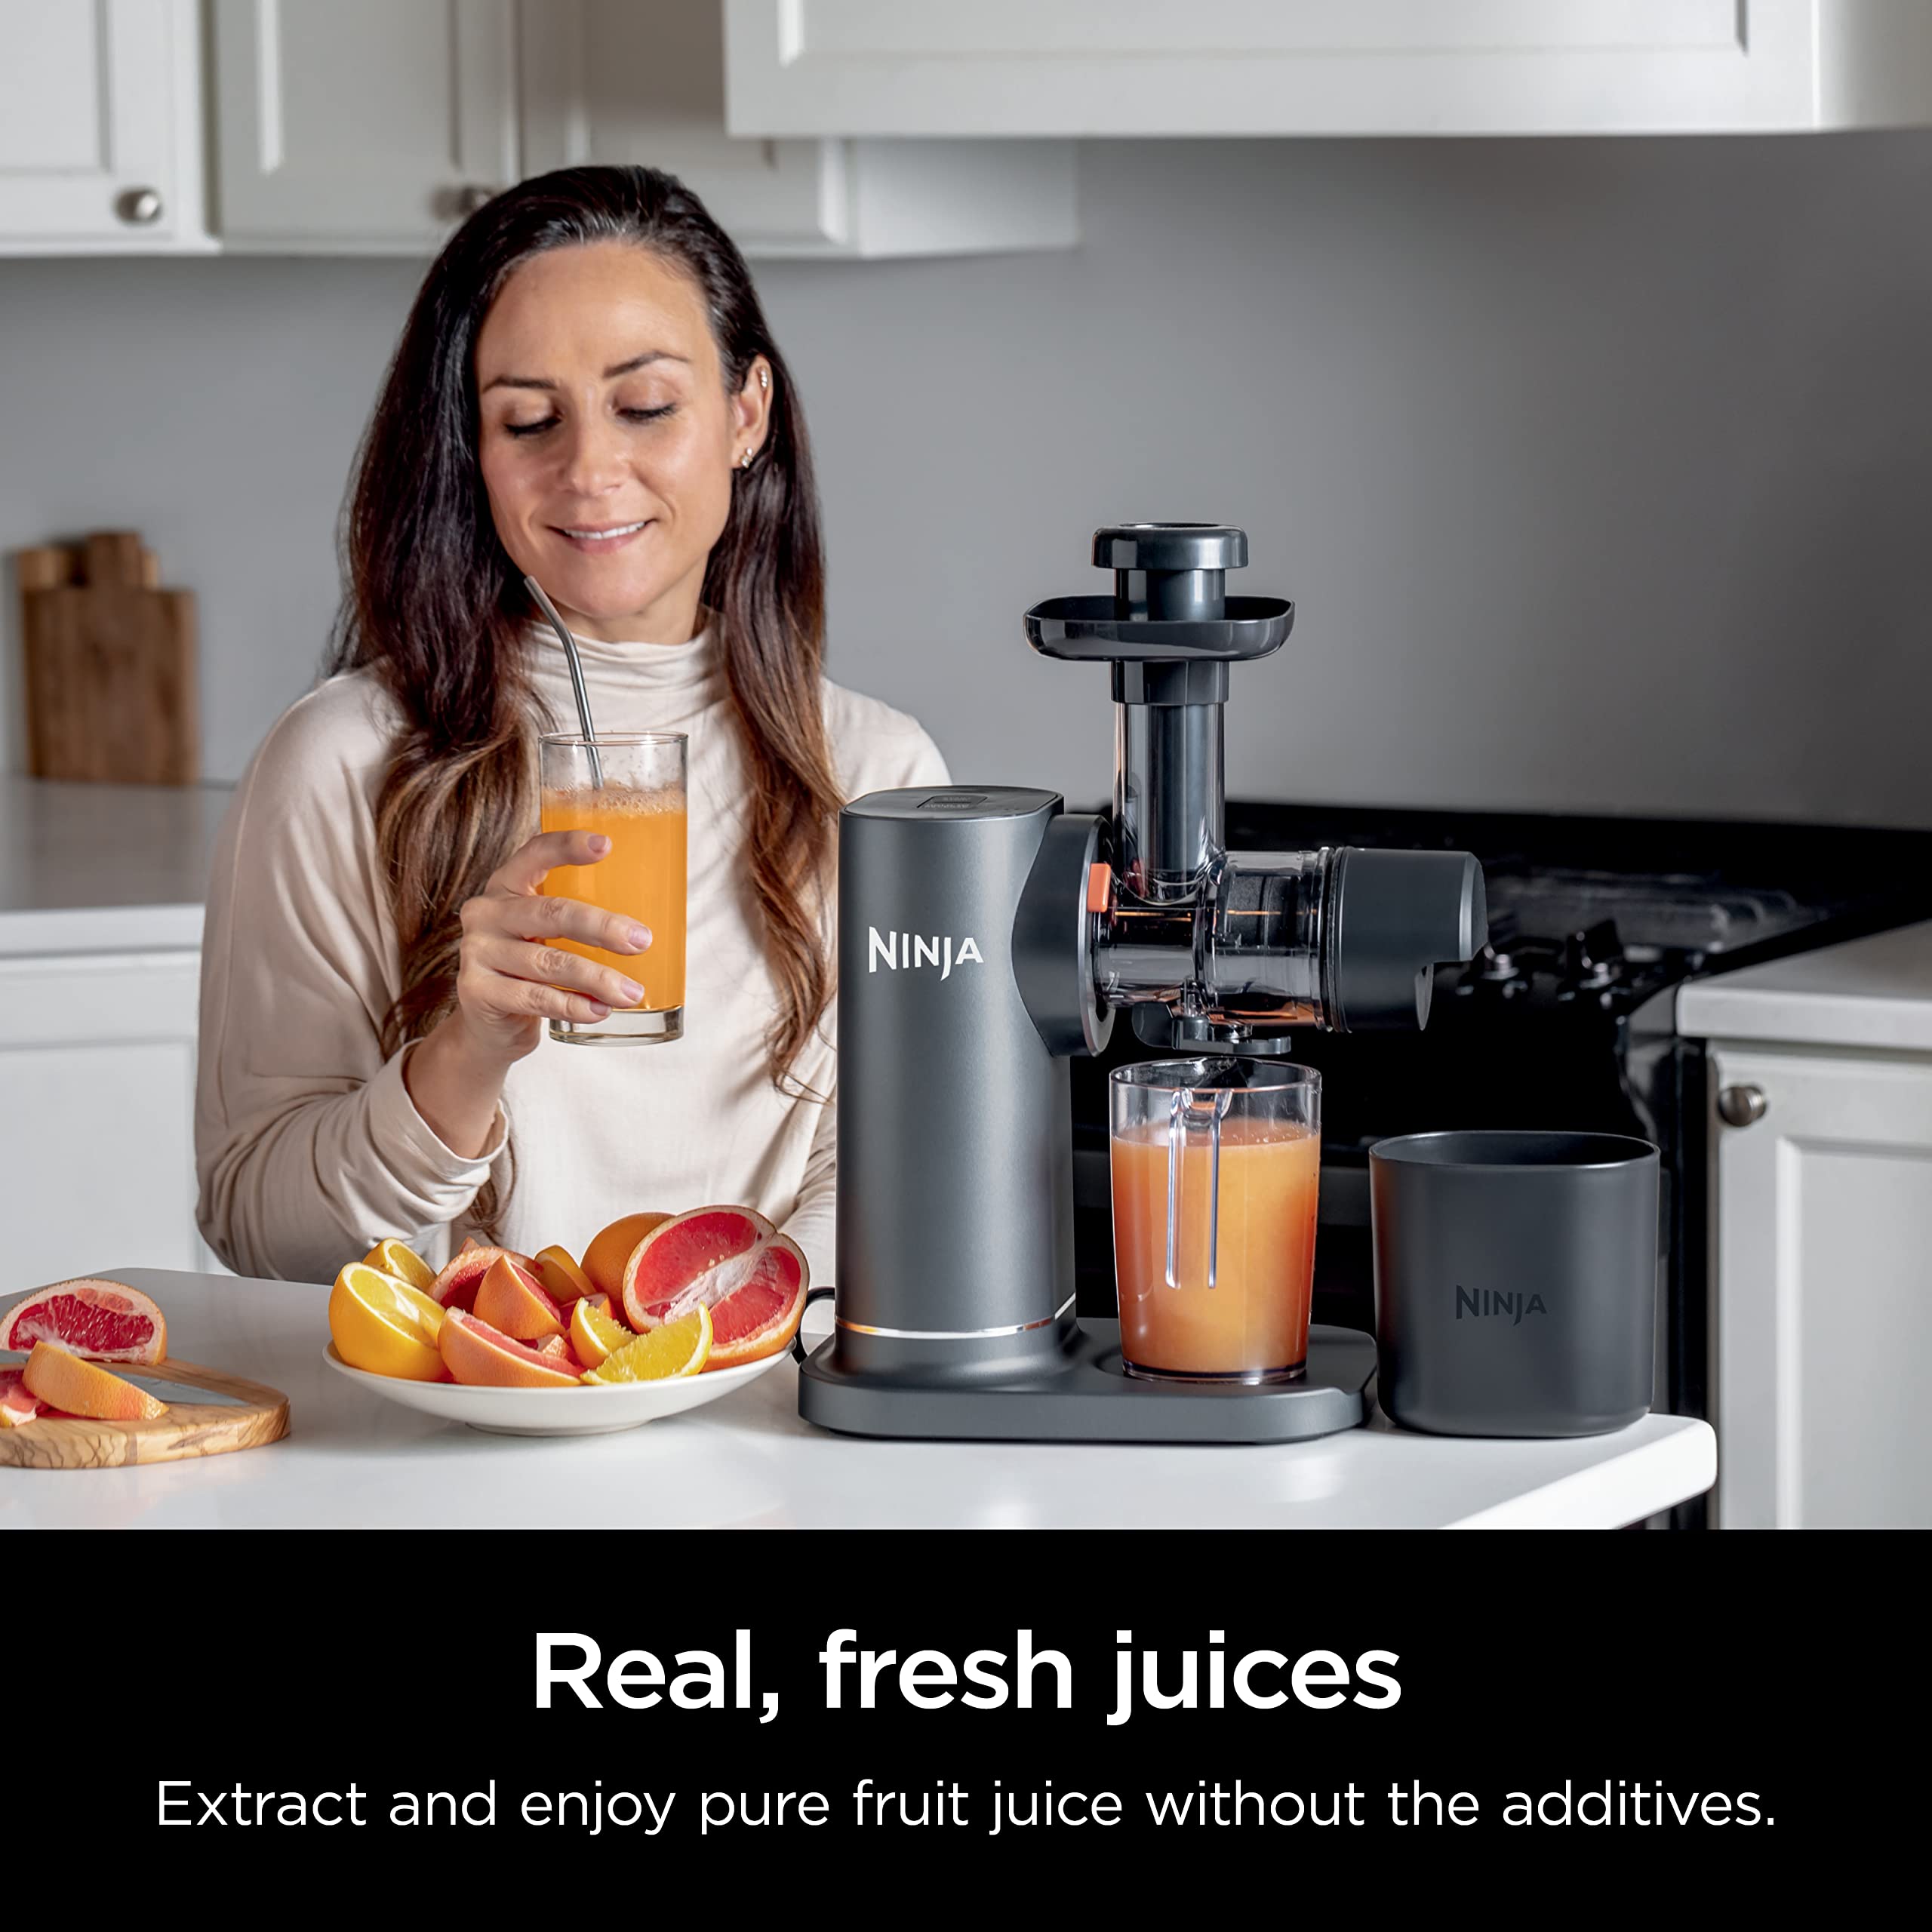 Ninja JC151 NeverClog Cold Press Juicer, Powerful Slow Juicer with Total Pulp Control, Countertop, Electric, 2 Pulp Functions, Dishwasher Safe, 2nd Generation, Charcoal